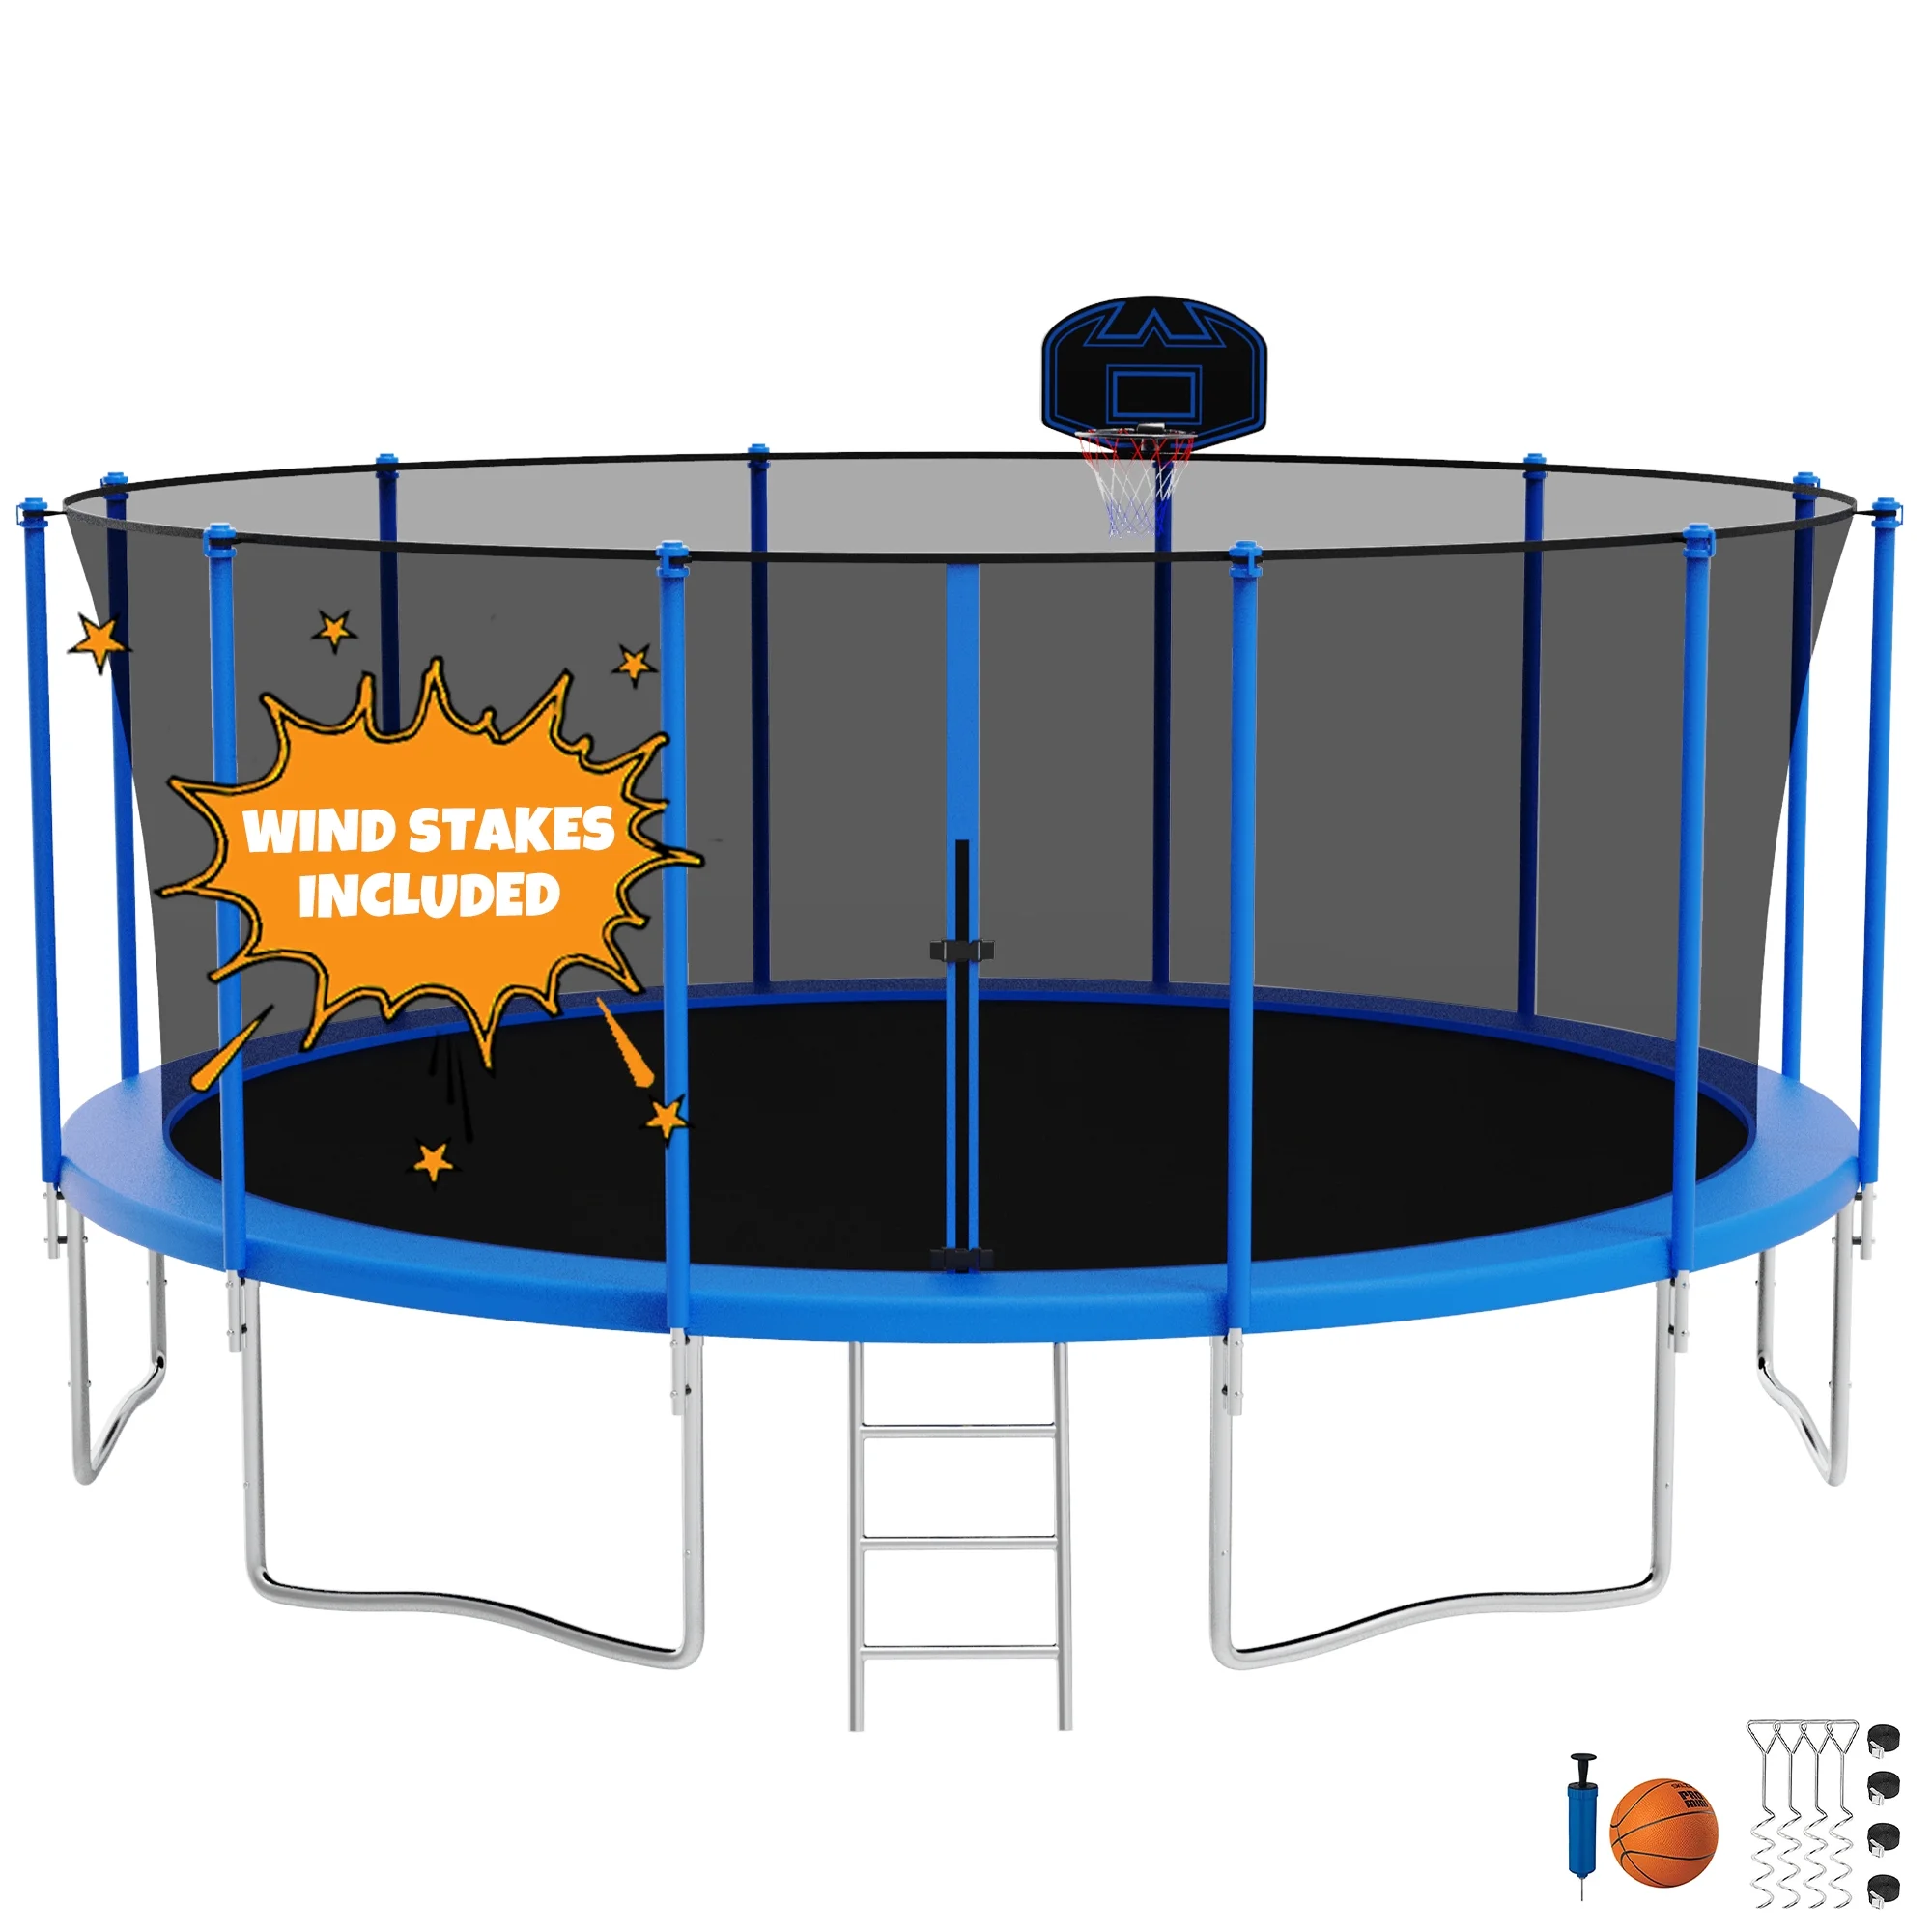 KOFUN Trampoline with Enclosure Net, 8 FT 10 FT 12 FT 14 FT 15 FT 16 FT Trampoline with Basketball Hoop, Ladder, Wind Stakes, ASTM CPC Approved, Blue